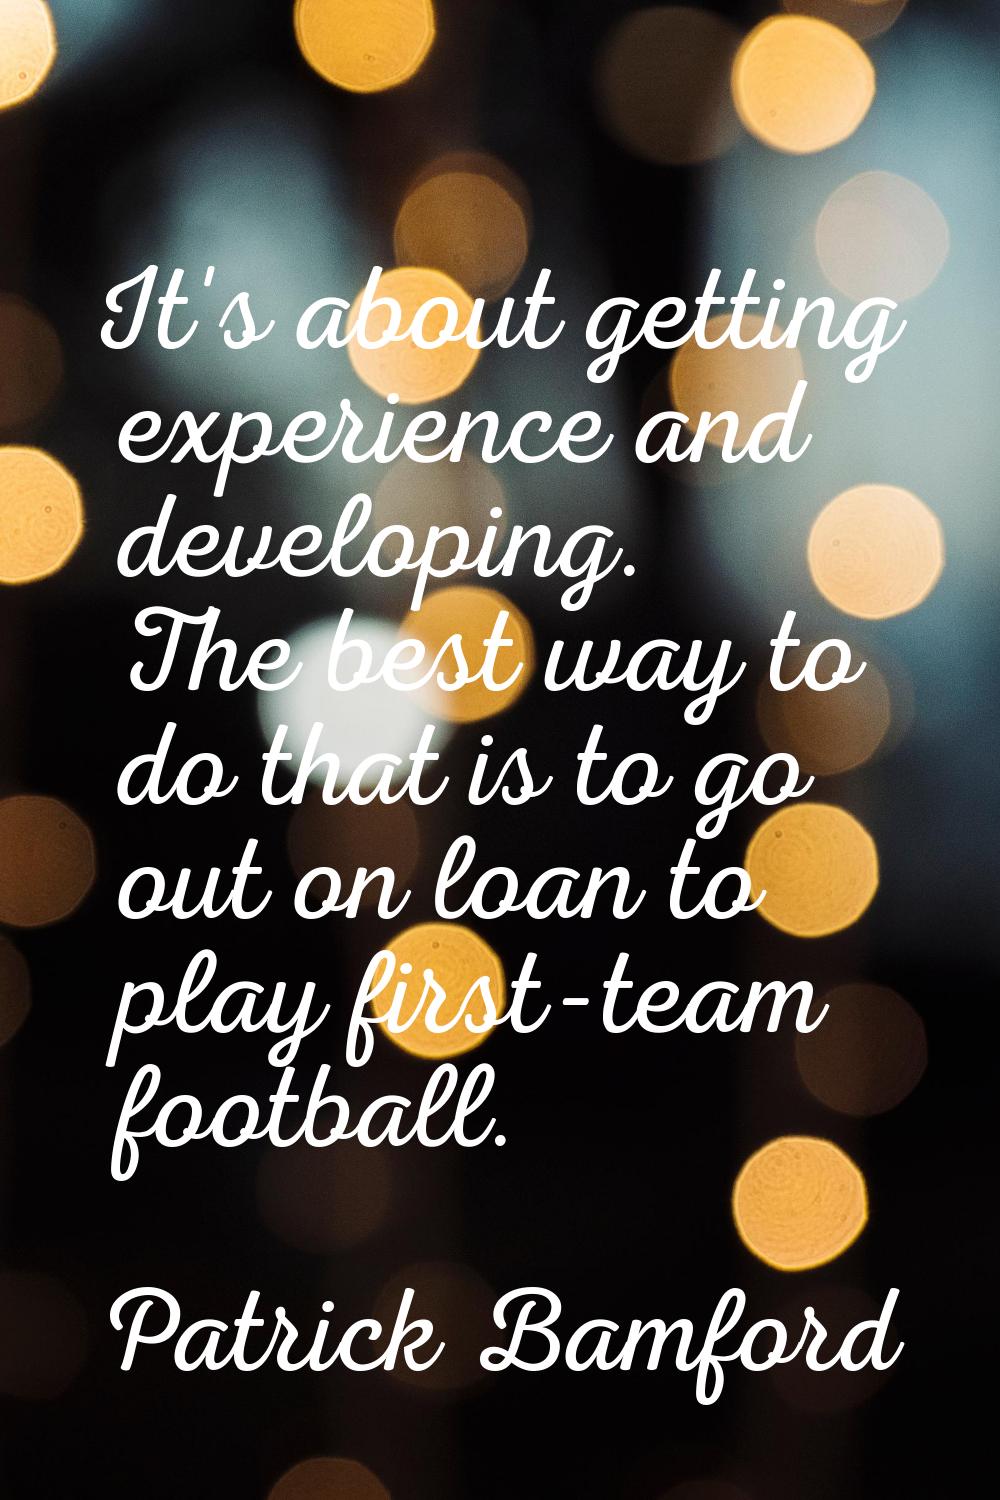 It's about getting experience and developing. The best way to do that is to go out on loan to play 